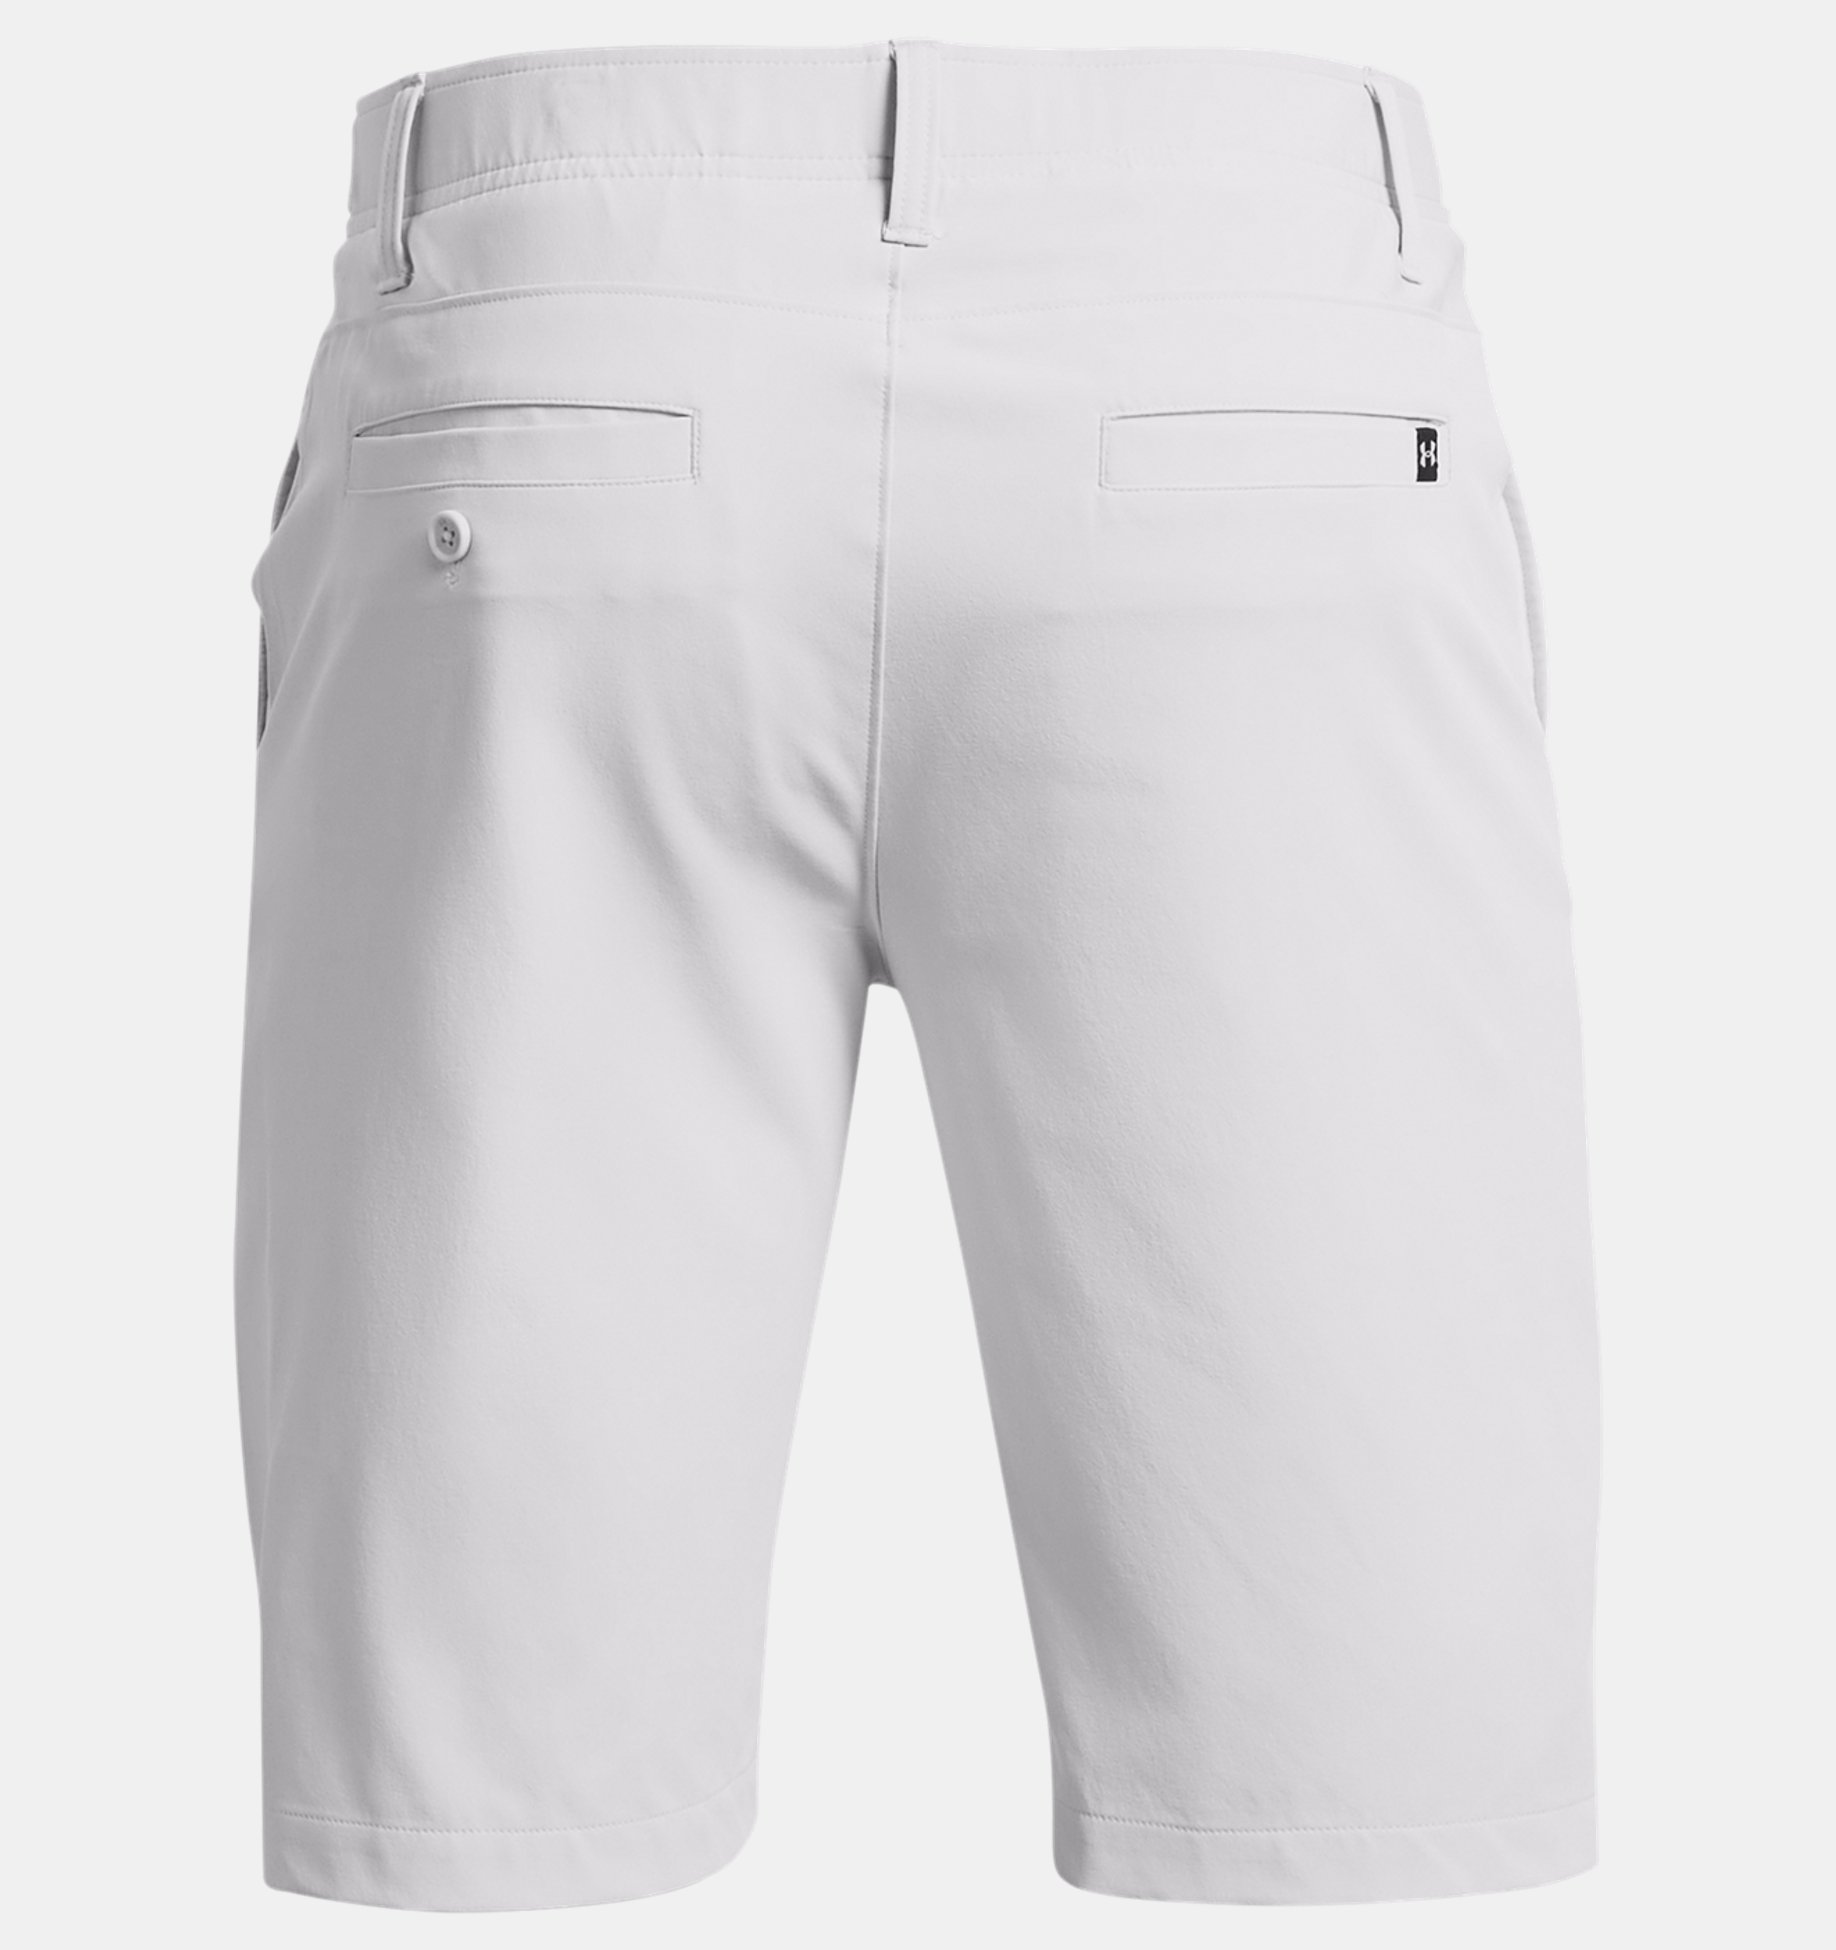 Under Armour  | 1370086-014 | Drive Taper Short | Halo Gray / Halo Gray